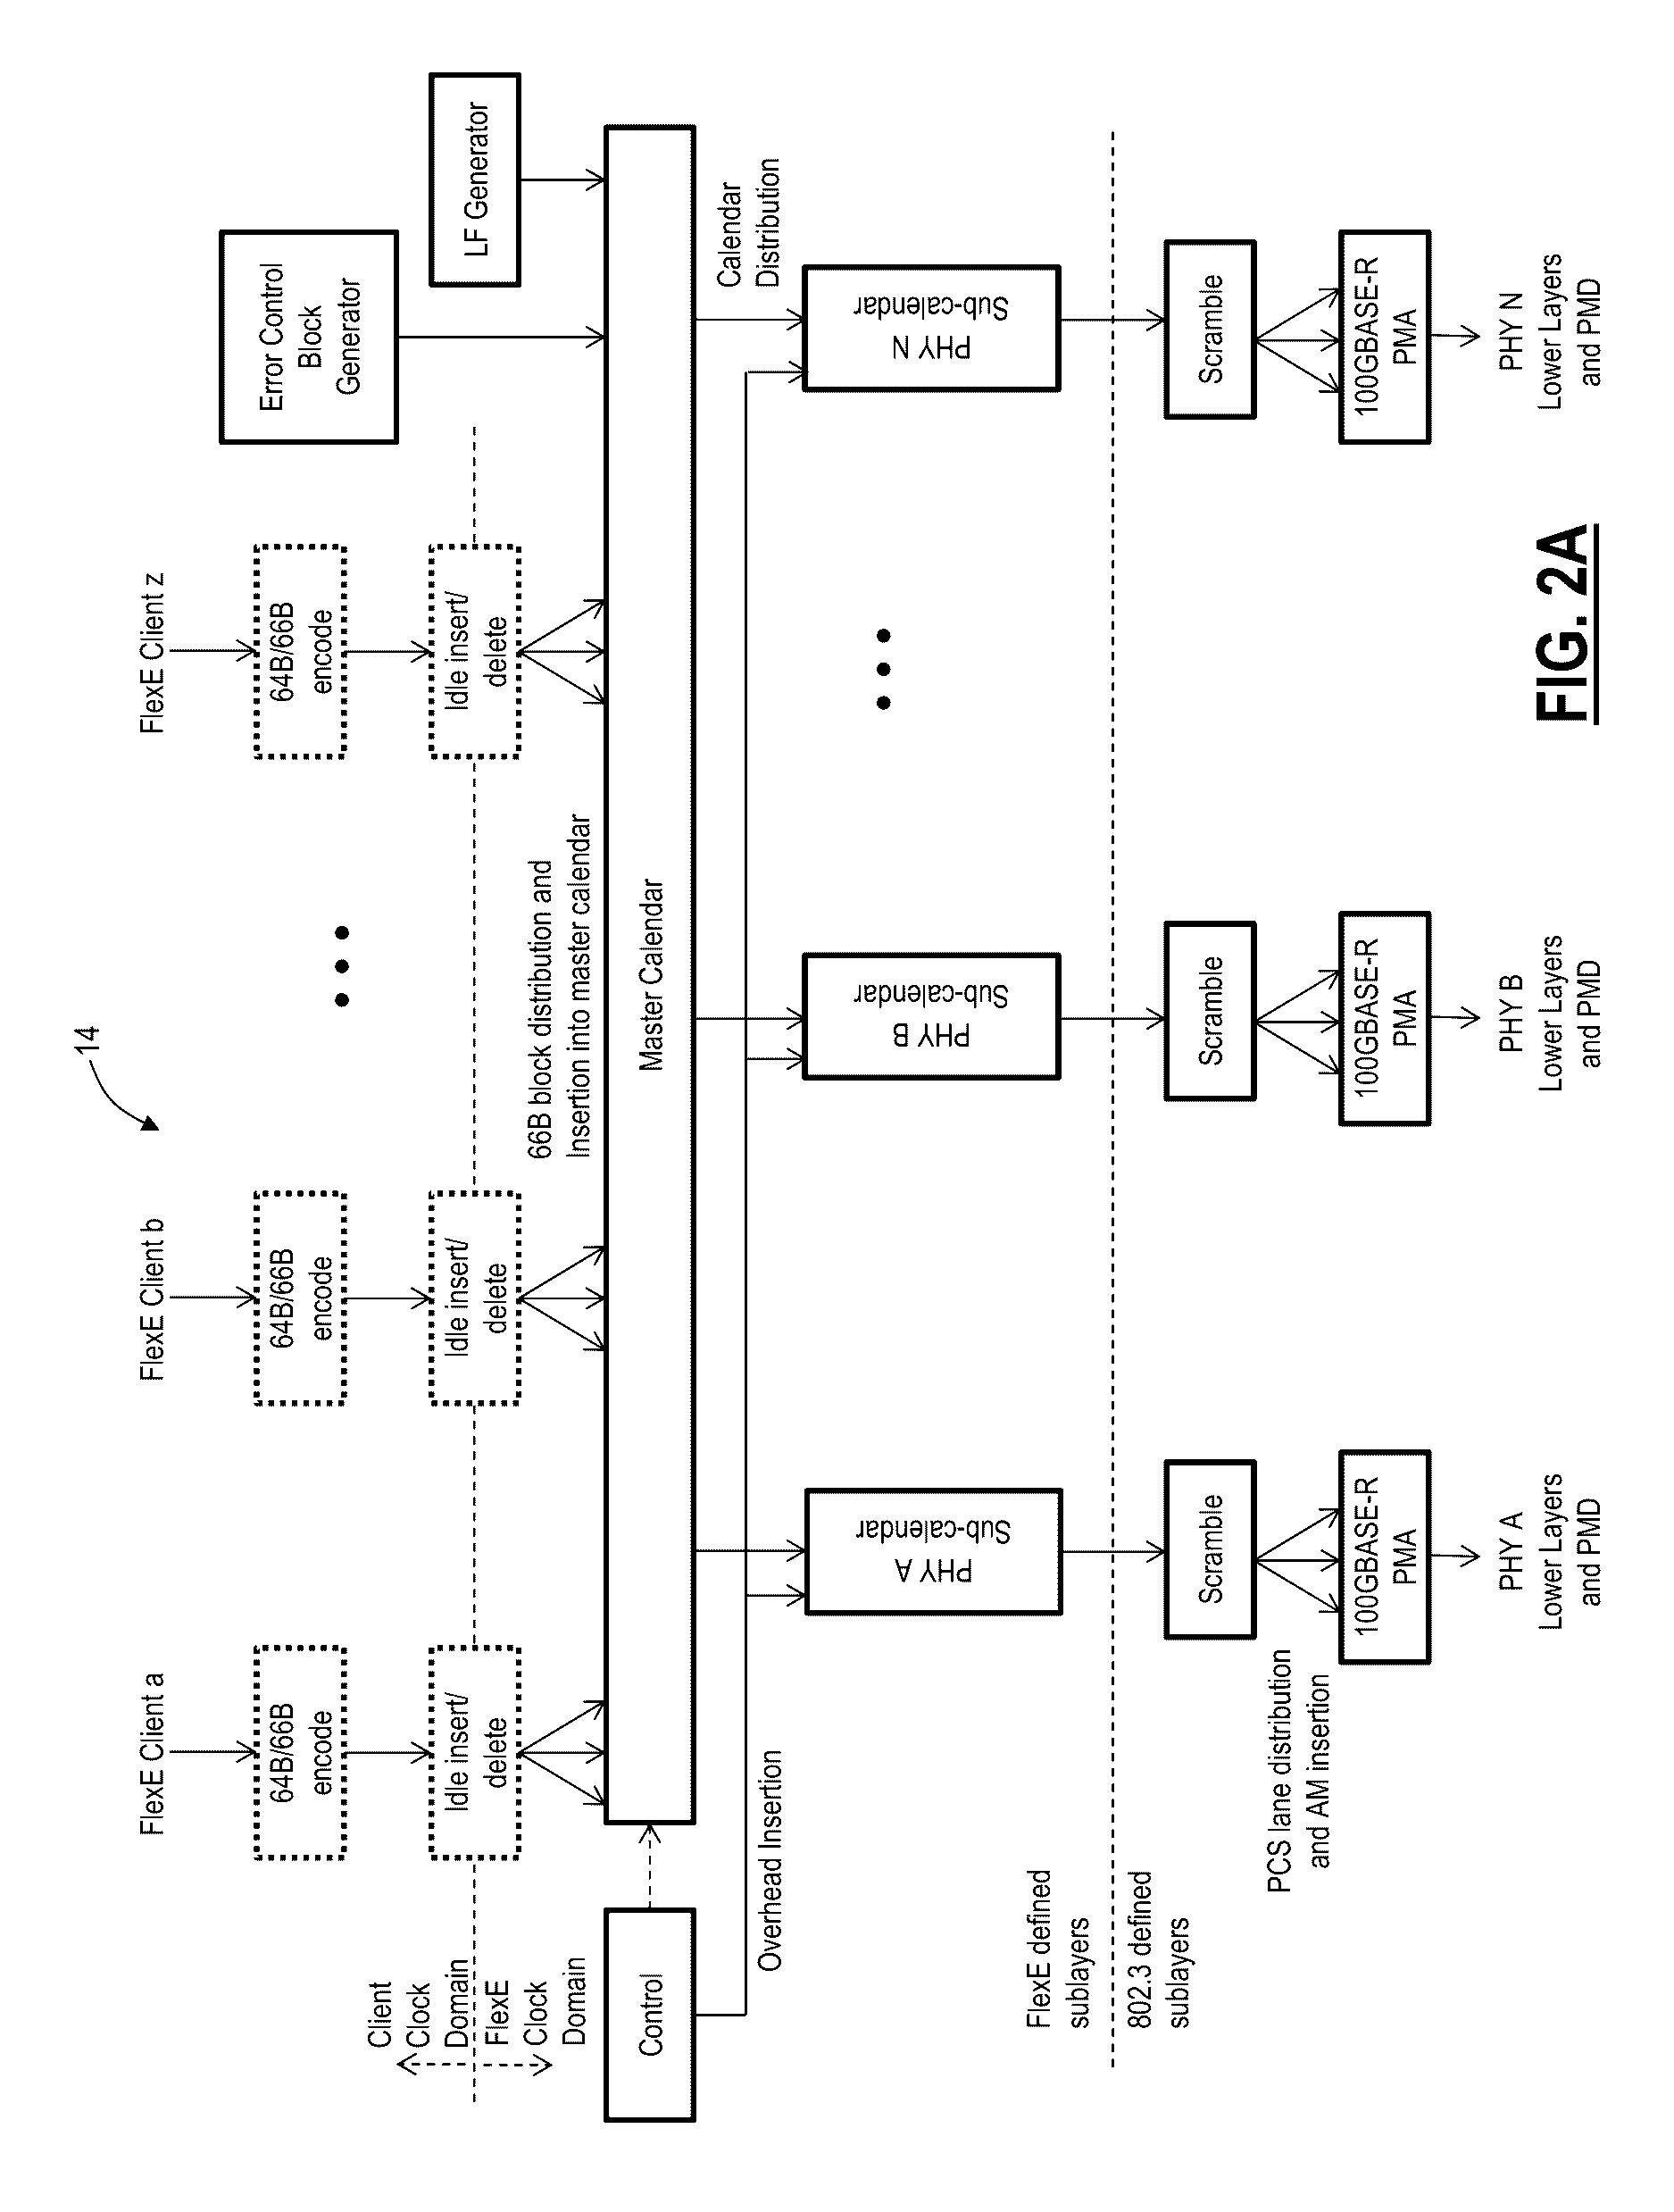 Flexible ethernet client multi-service and timing transparency systems and methods